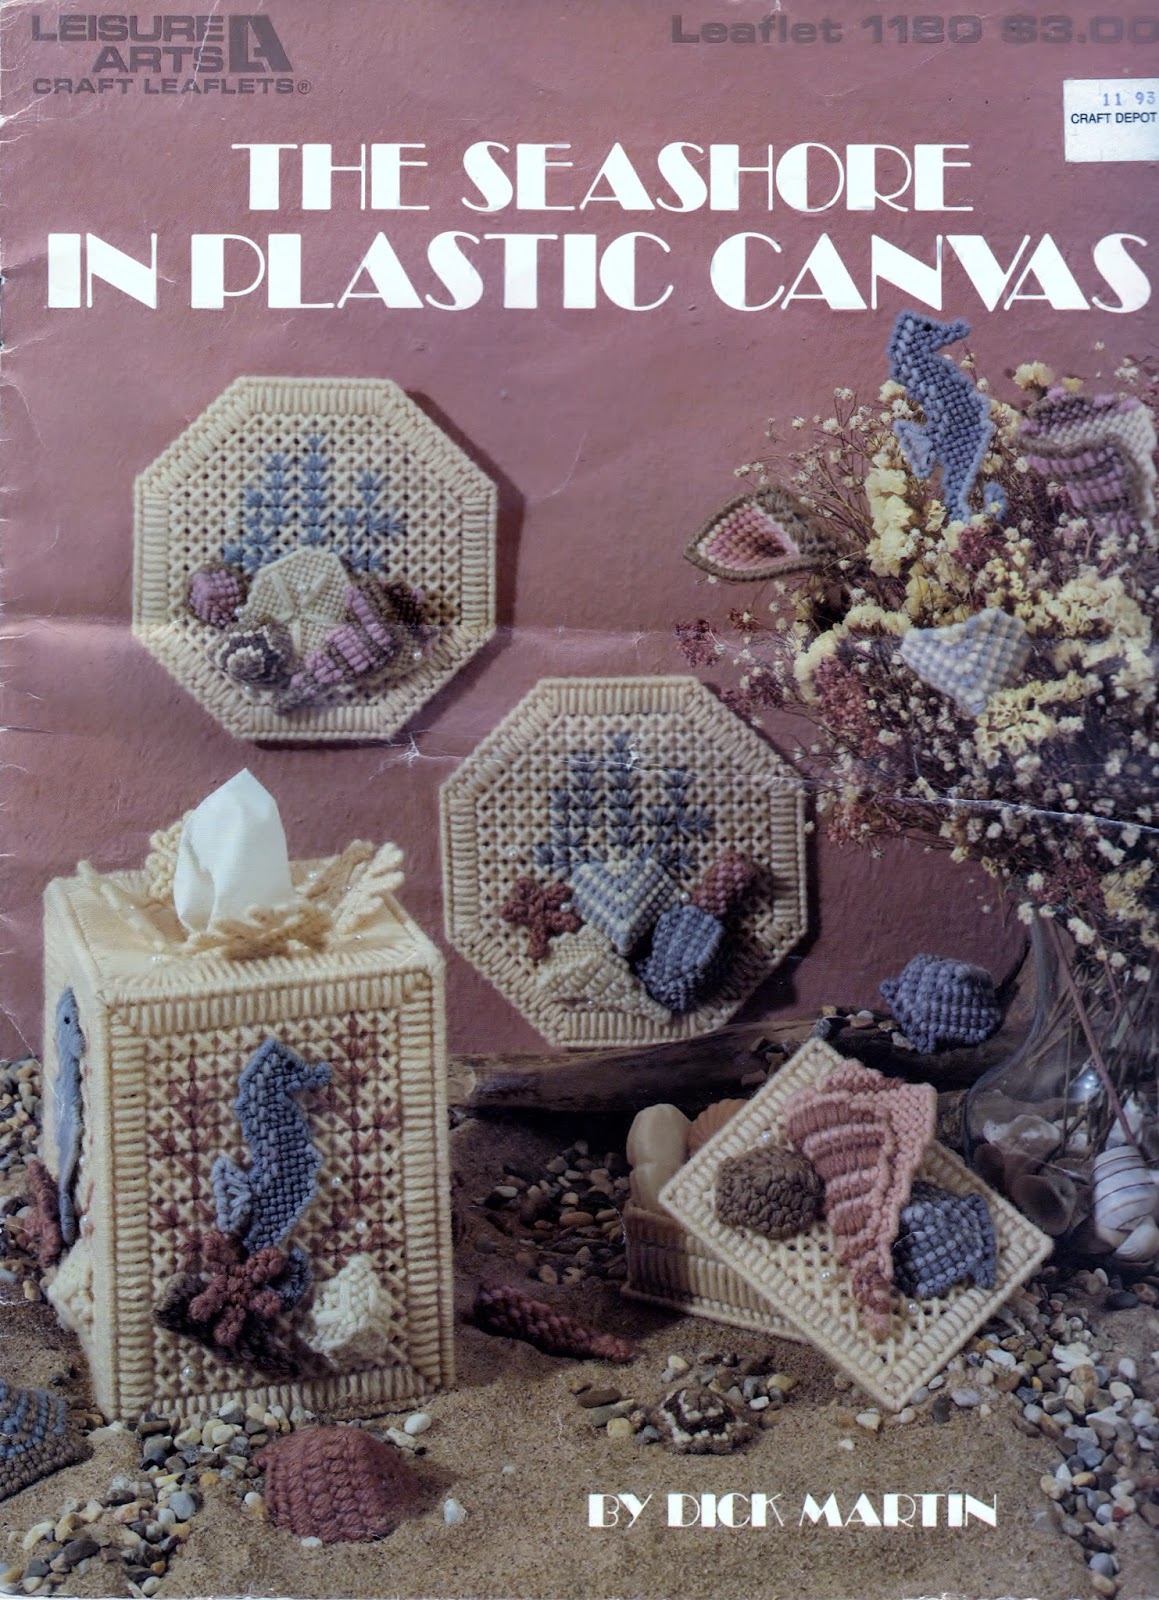 https://www.etsy.com/listing/128656490/plastic-canvas-projects-1988-6-pages﻿